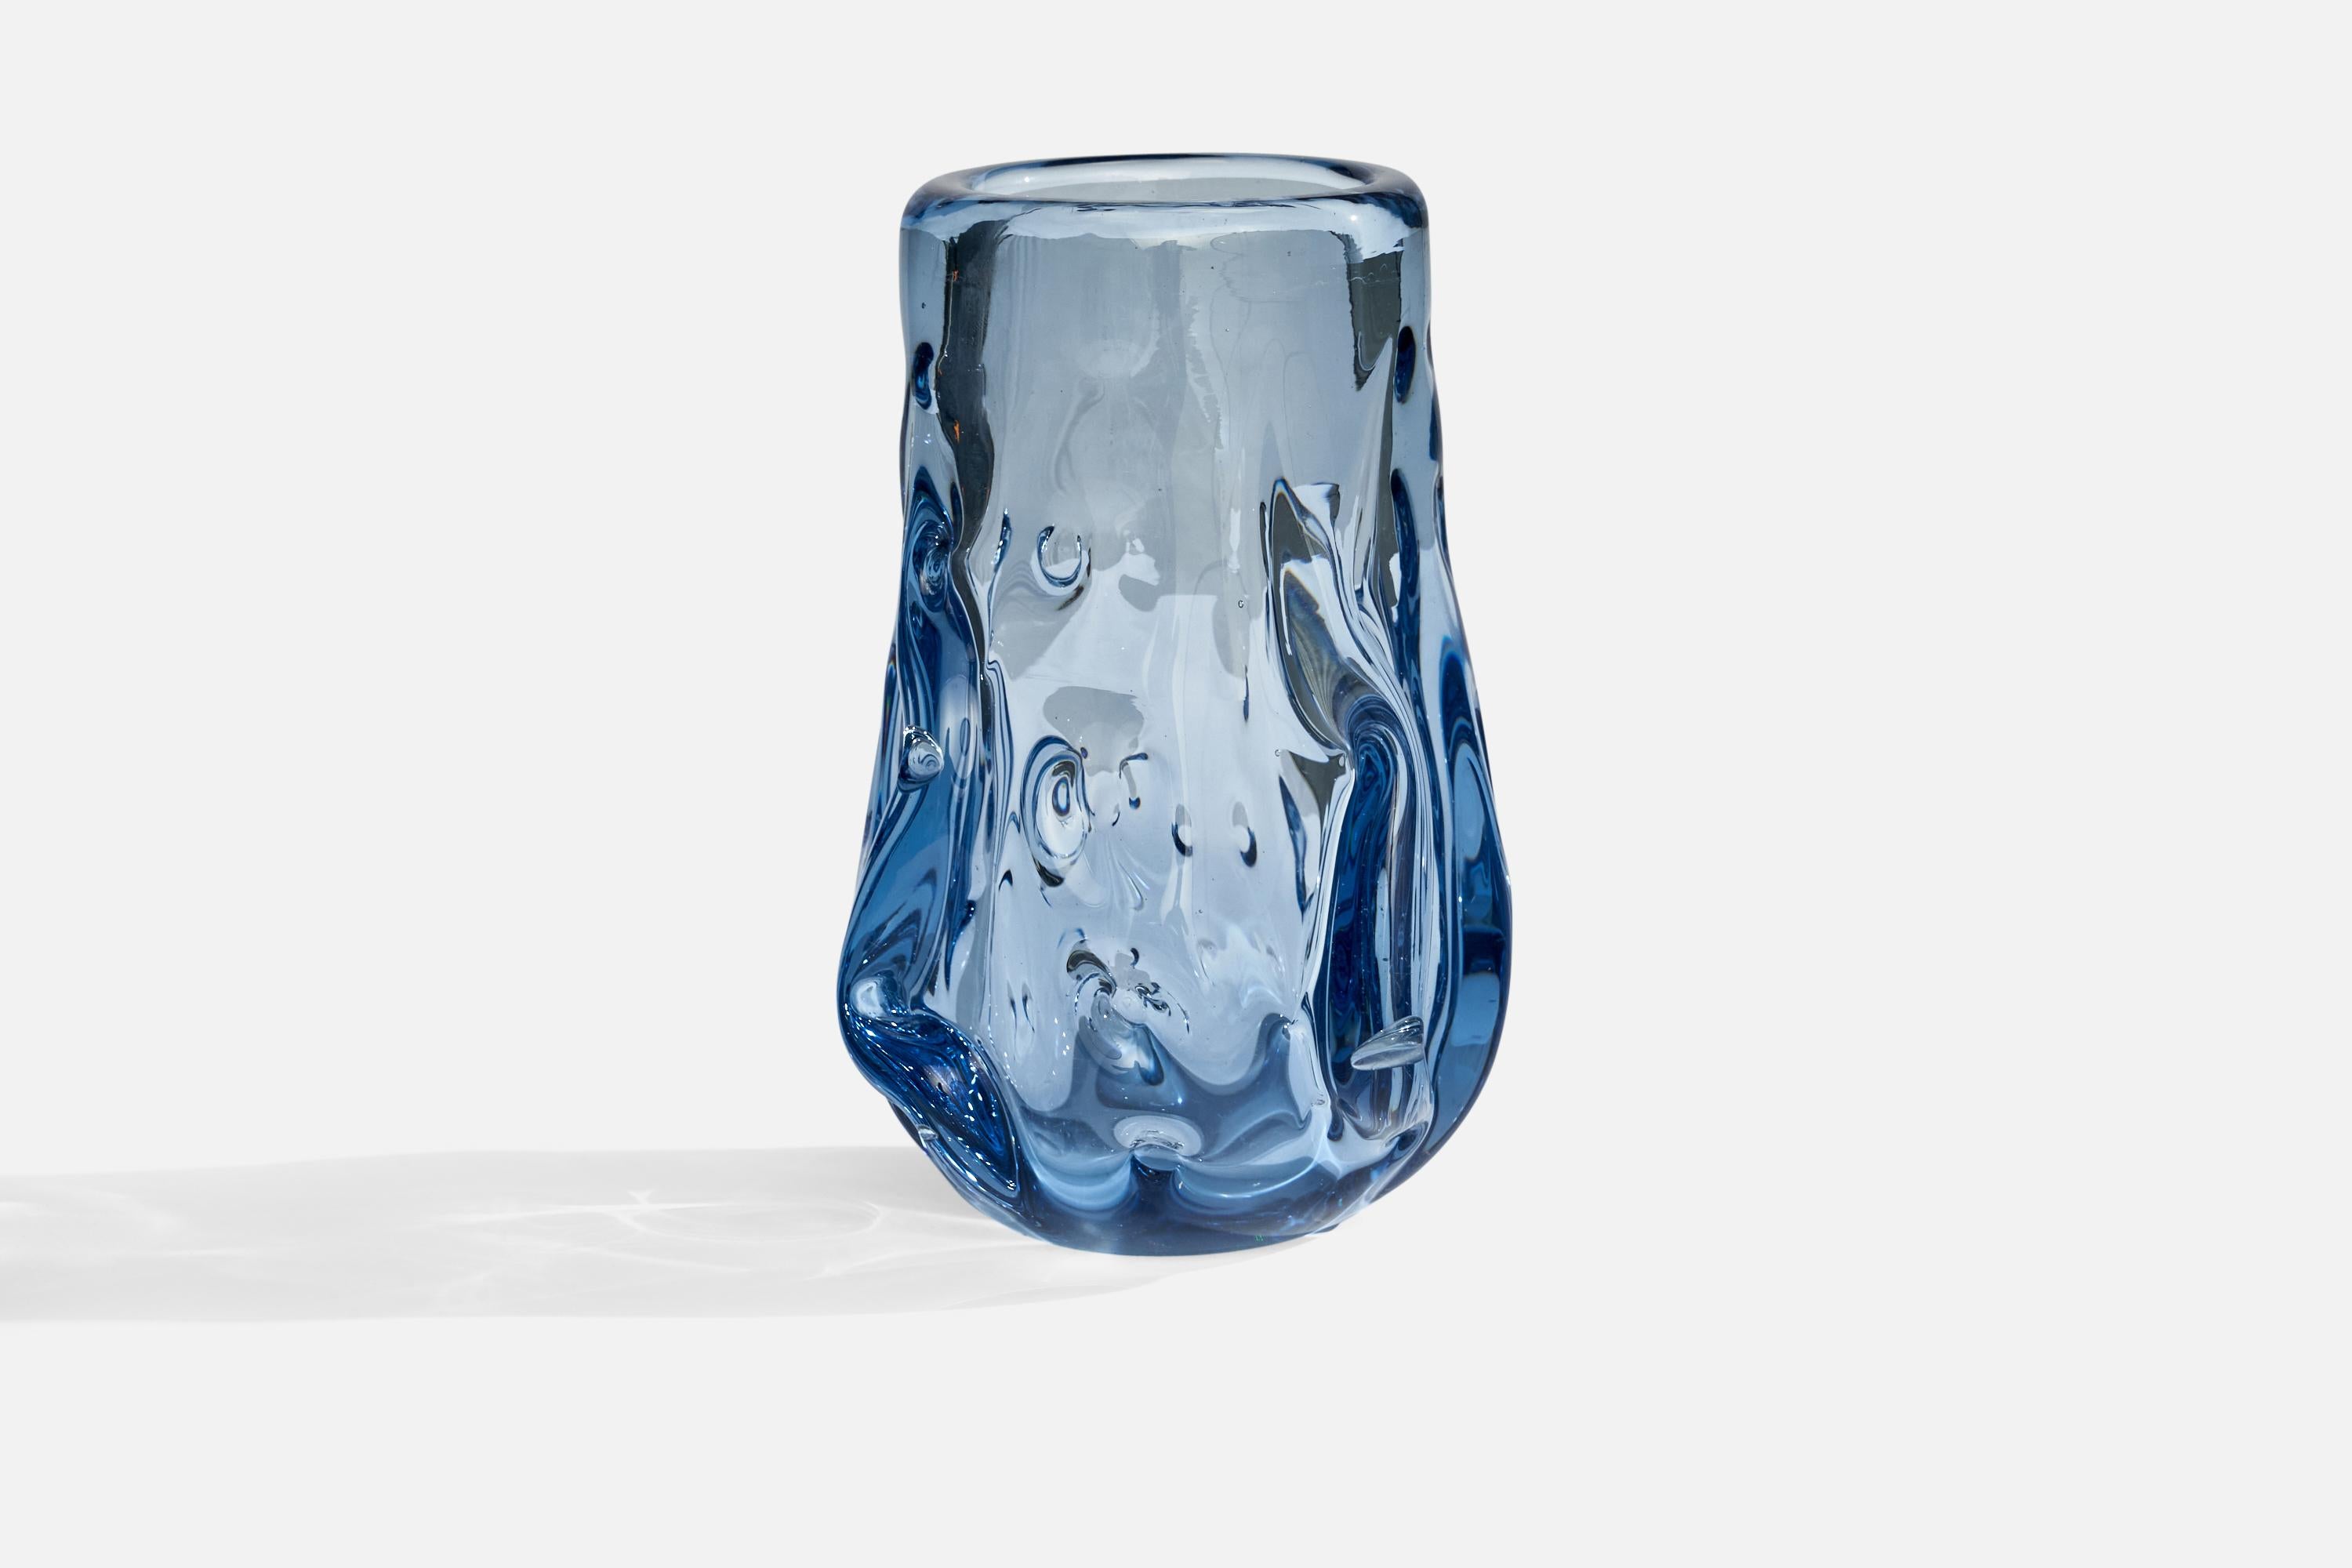 A organic blue-colored blown glass vase designed by Börne Augustsson and produced by Åseda Glasbruk, Sweden, c. 1940s.